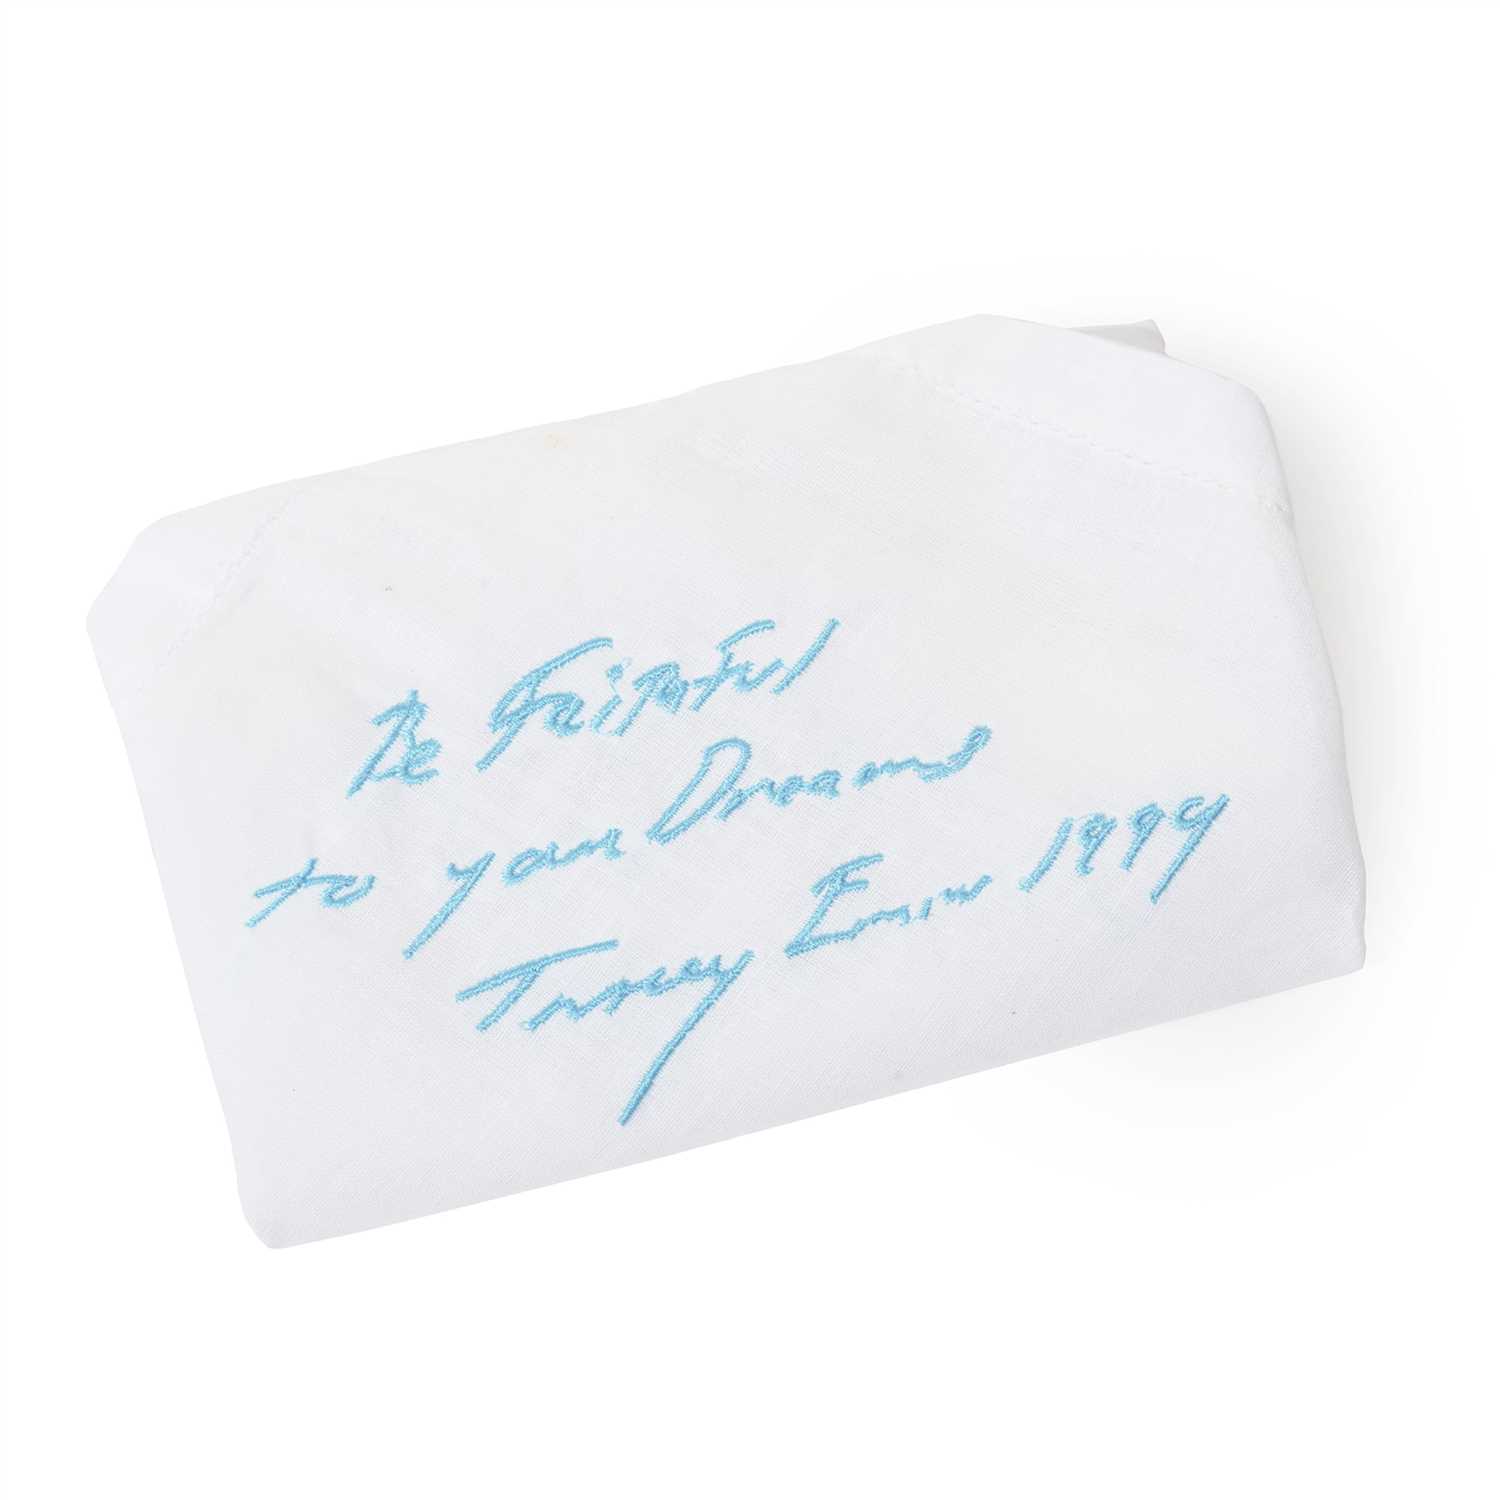 Lot 77 - Tracey Emin (British, born 1963) "BE FAITHFUL TO YOUR DREAMS" EMBROIDERED HANDKERCHIEF, 1999